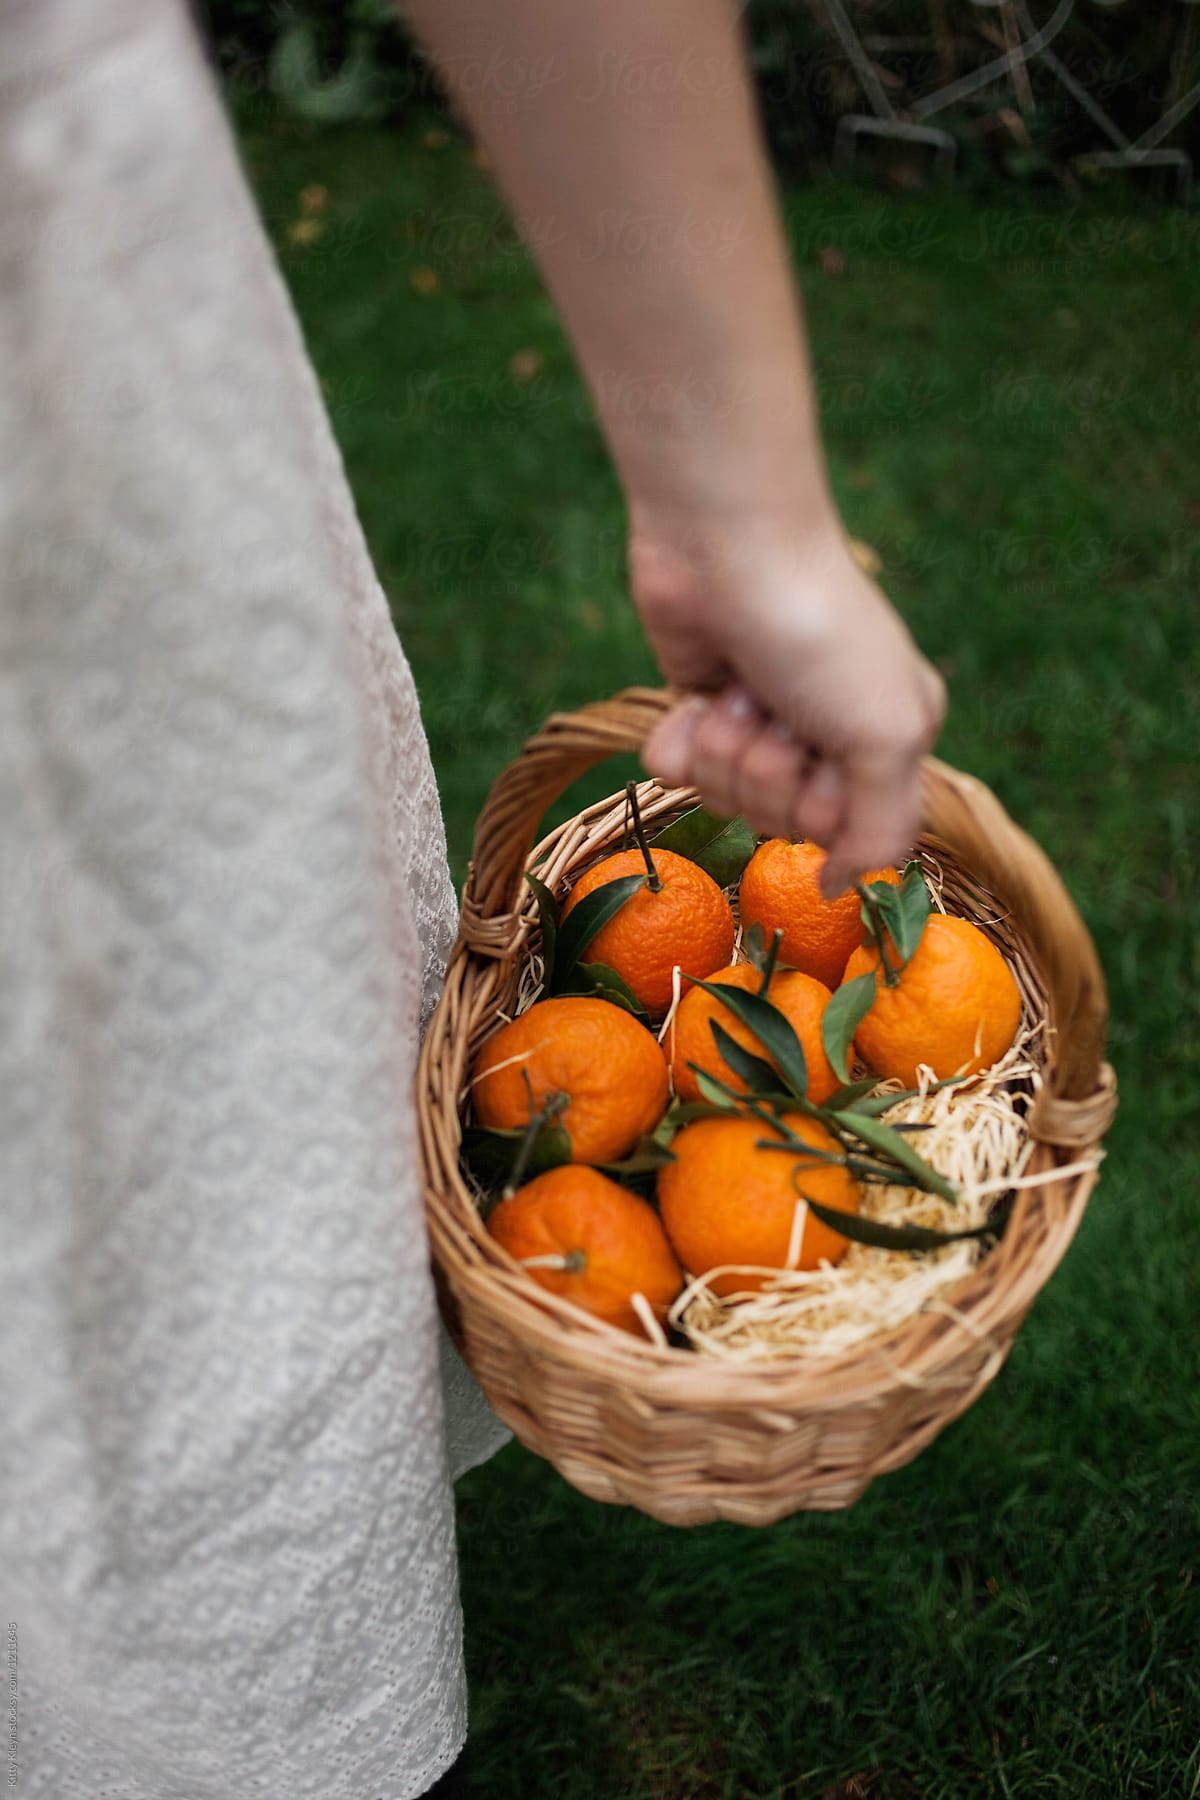 Woman carrying basket of clementines